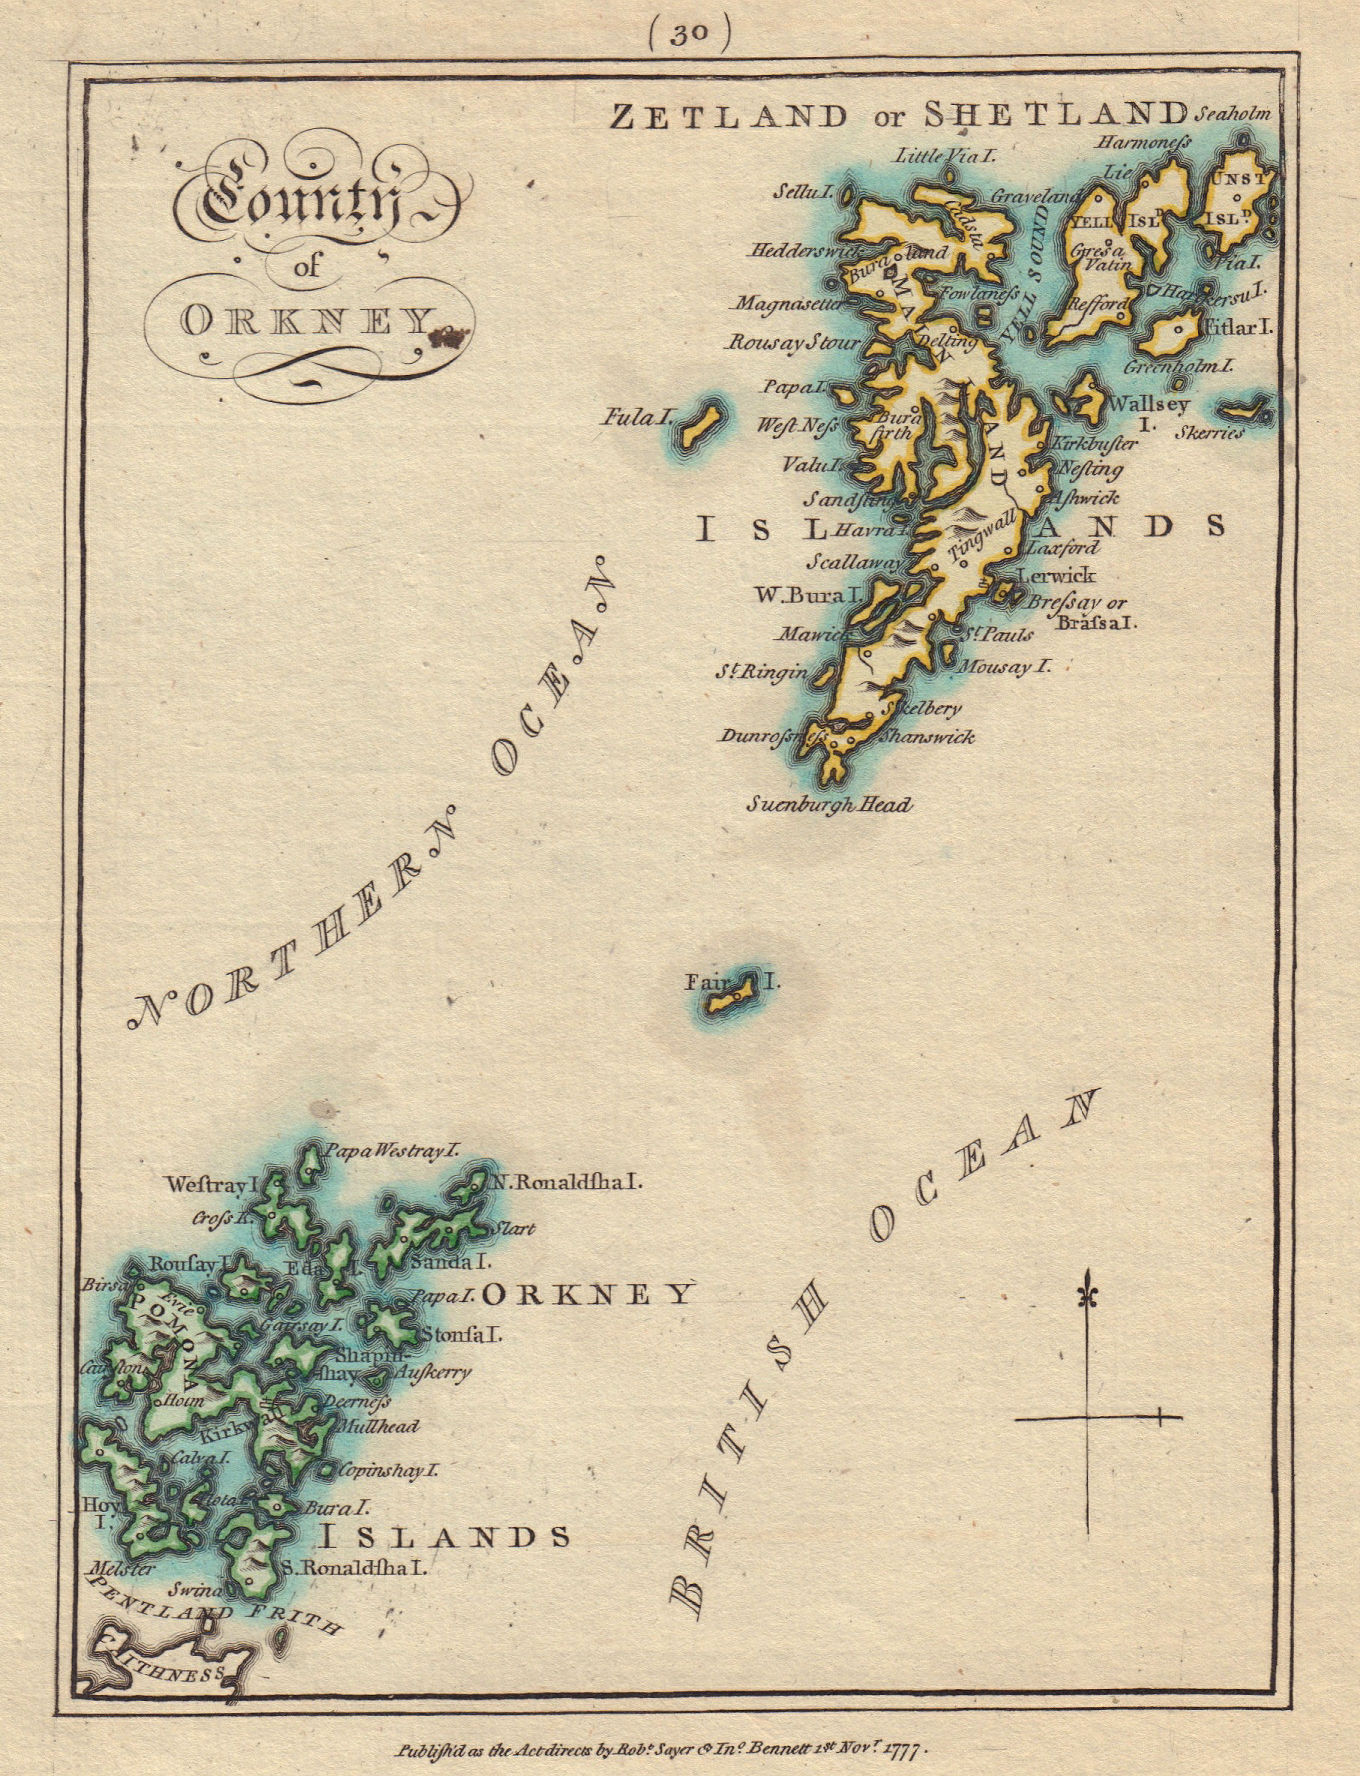 Associate Product County of Orkney. Orkney & Shetland. SAYER / ARMSTRONG 1794 old antique map